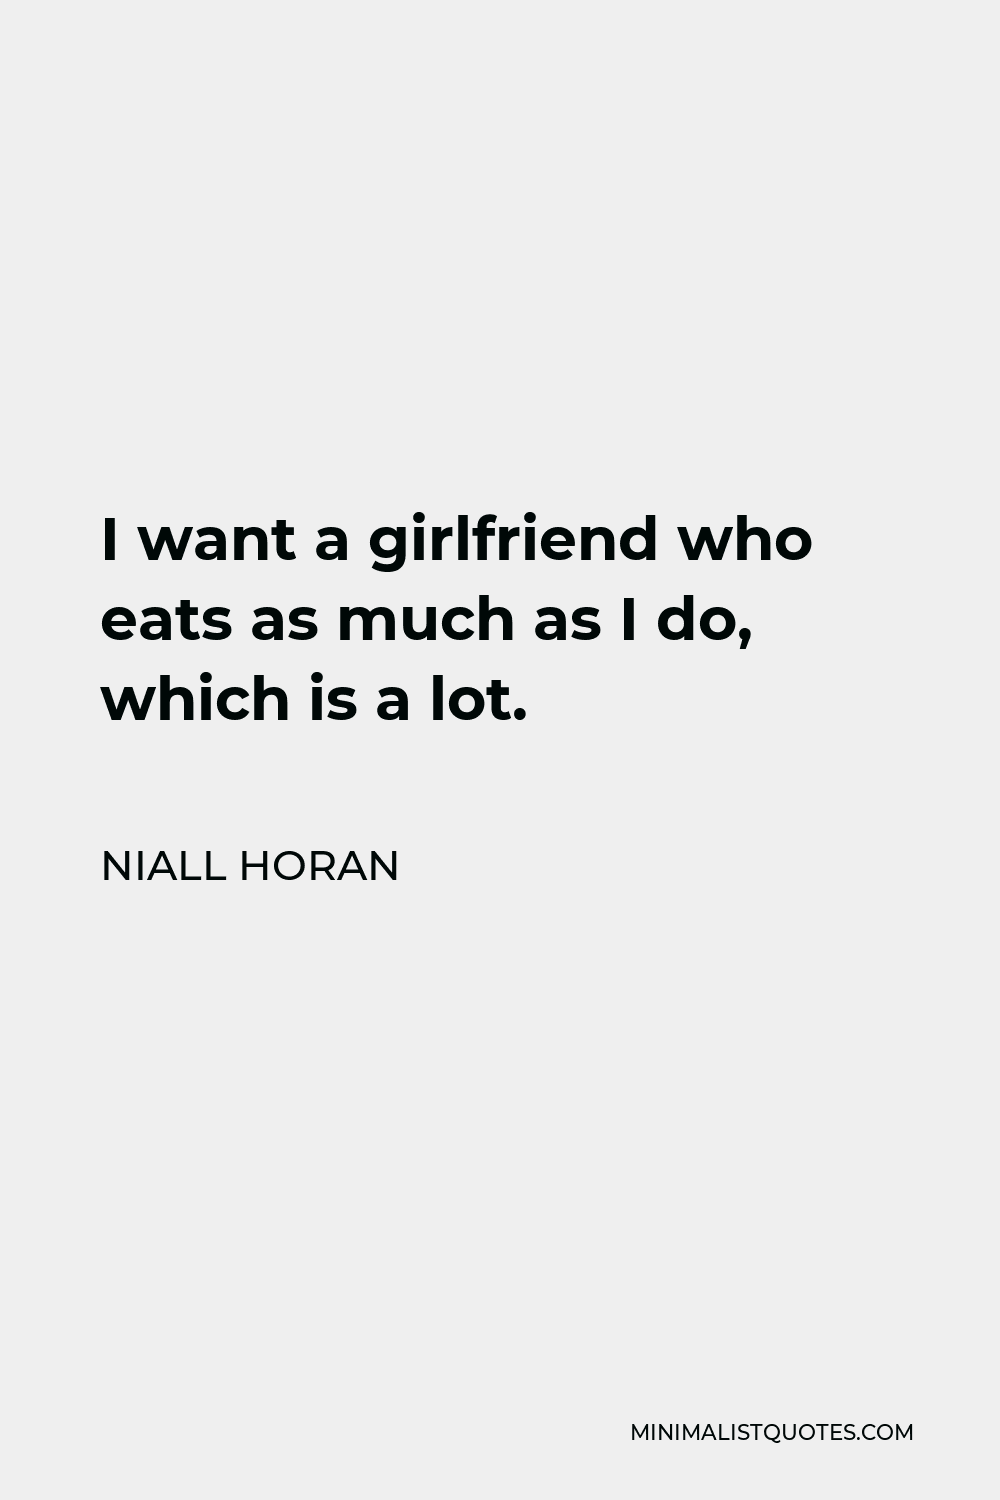 Niall Horan Quote - I want a girlfriend who eats as much as I do, which is a lot.